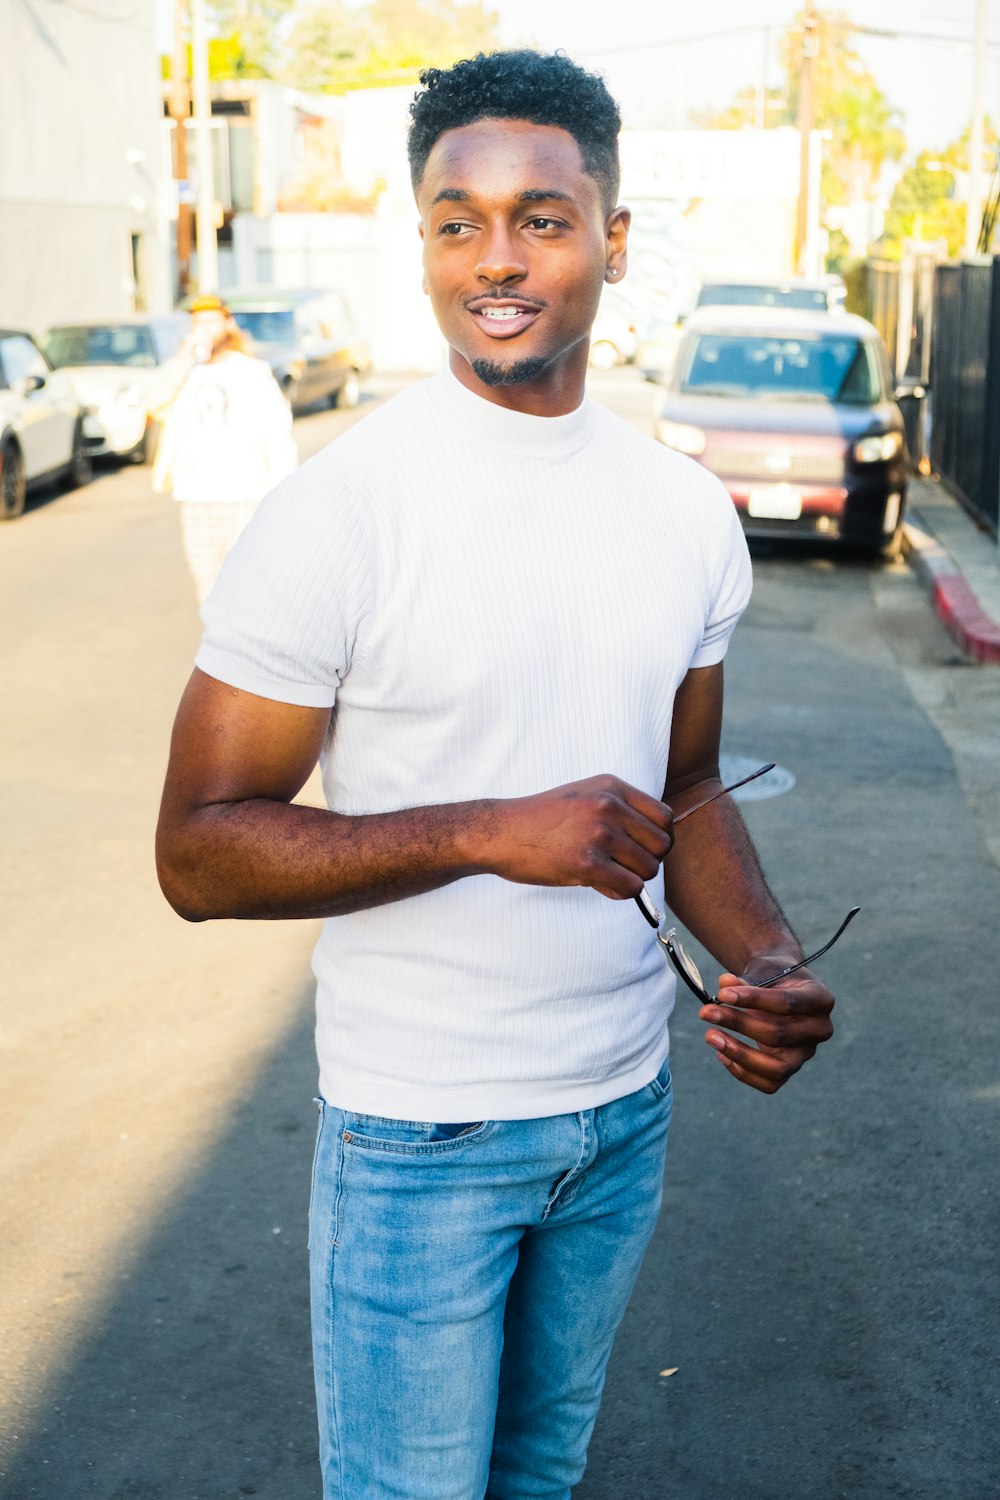 man in white crew neck t-shirt and blue denim jeans standing on sidewalk during daytime